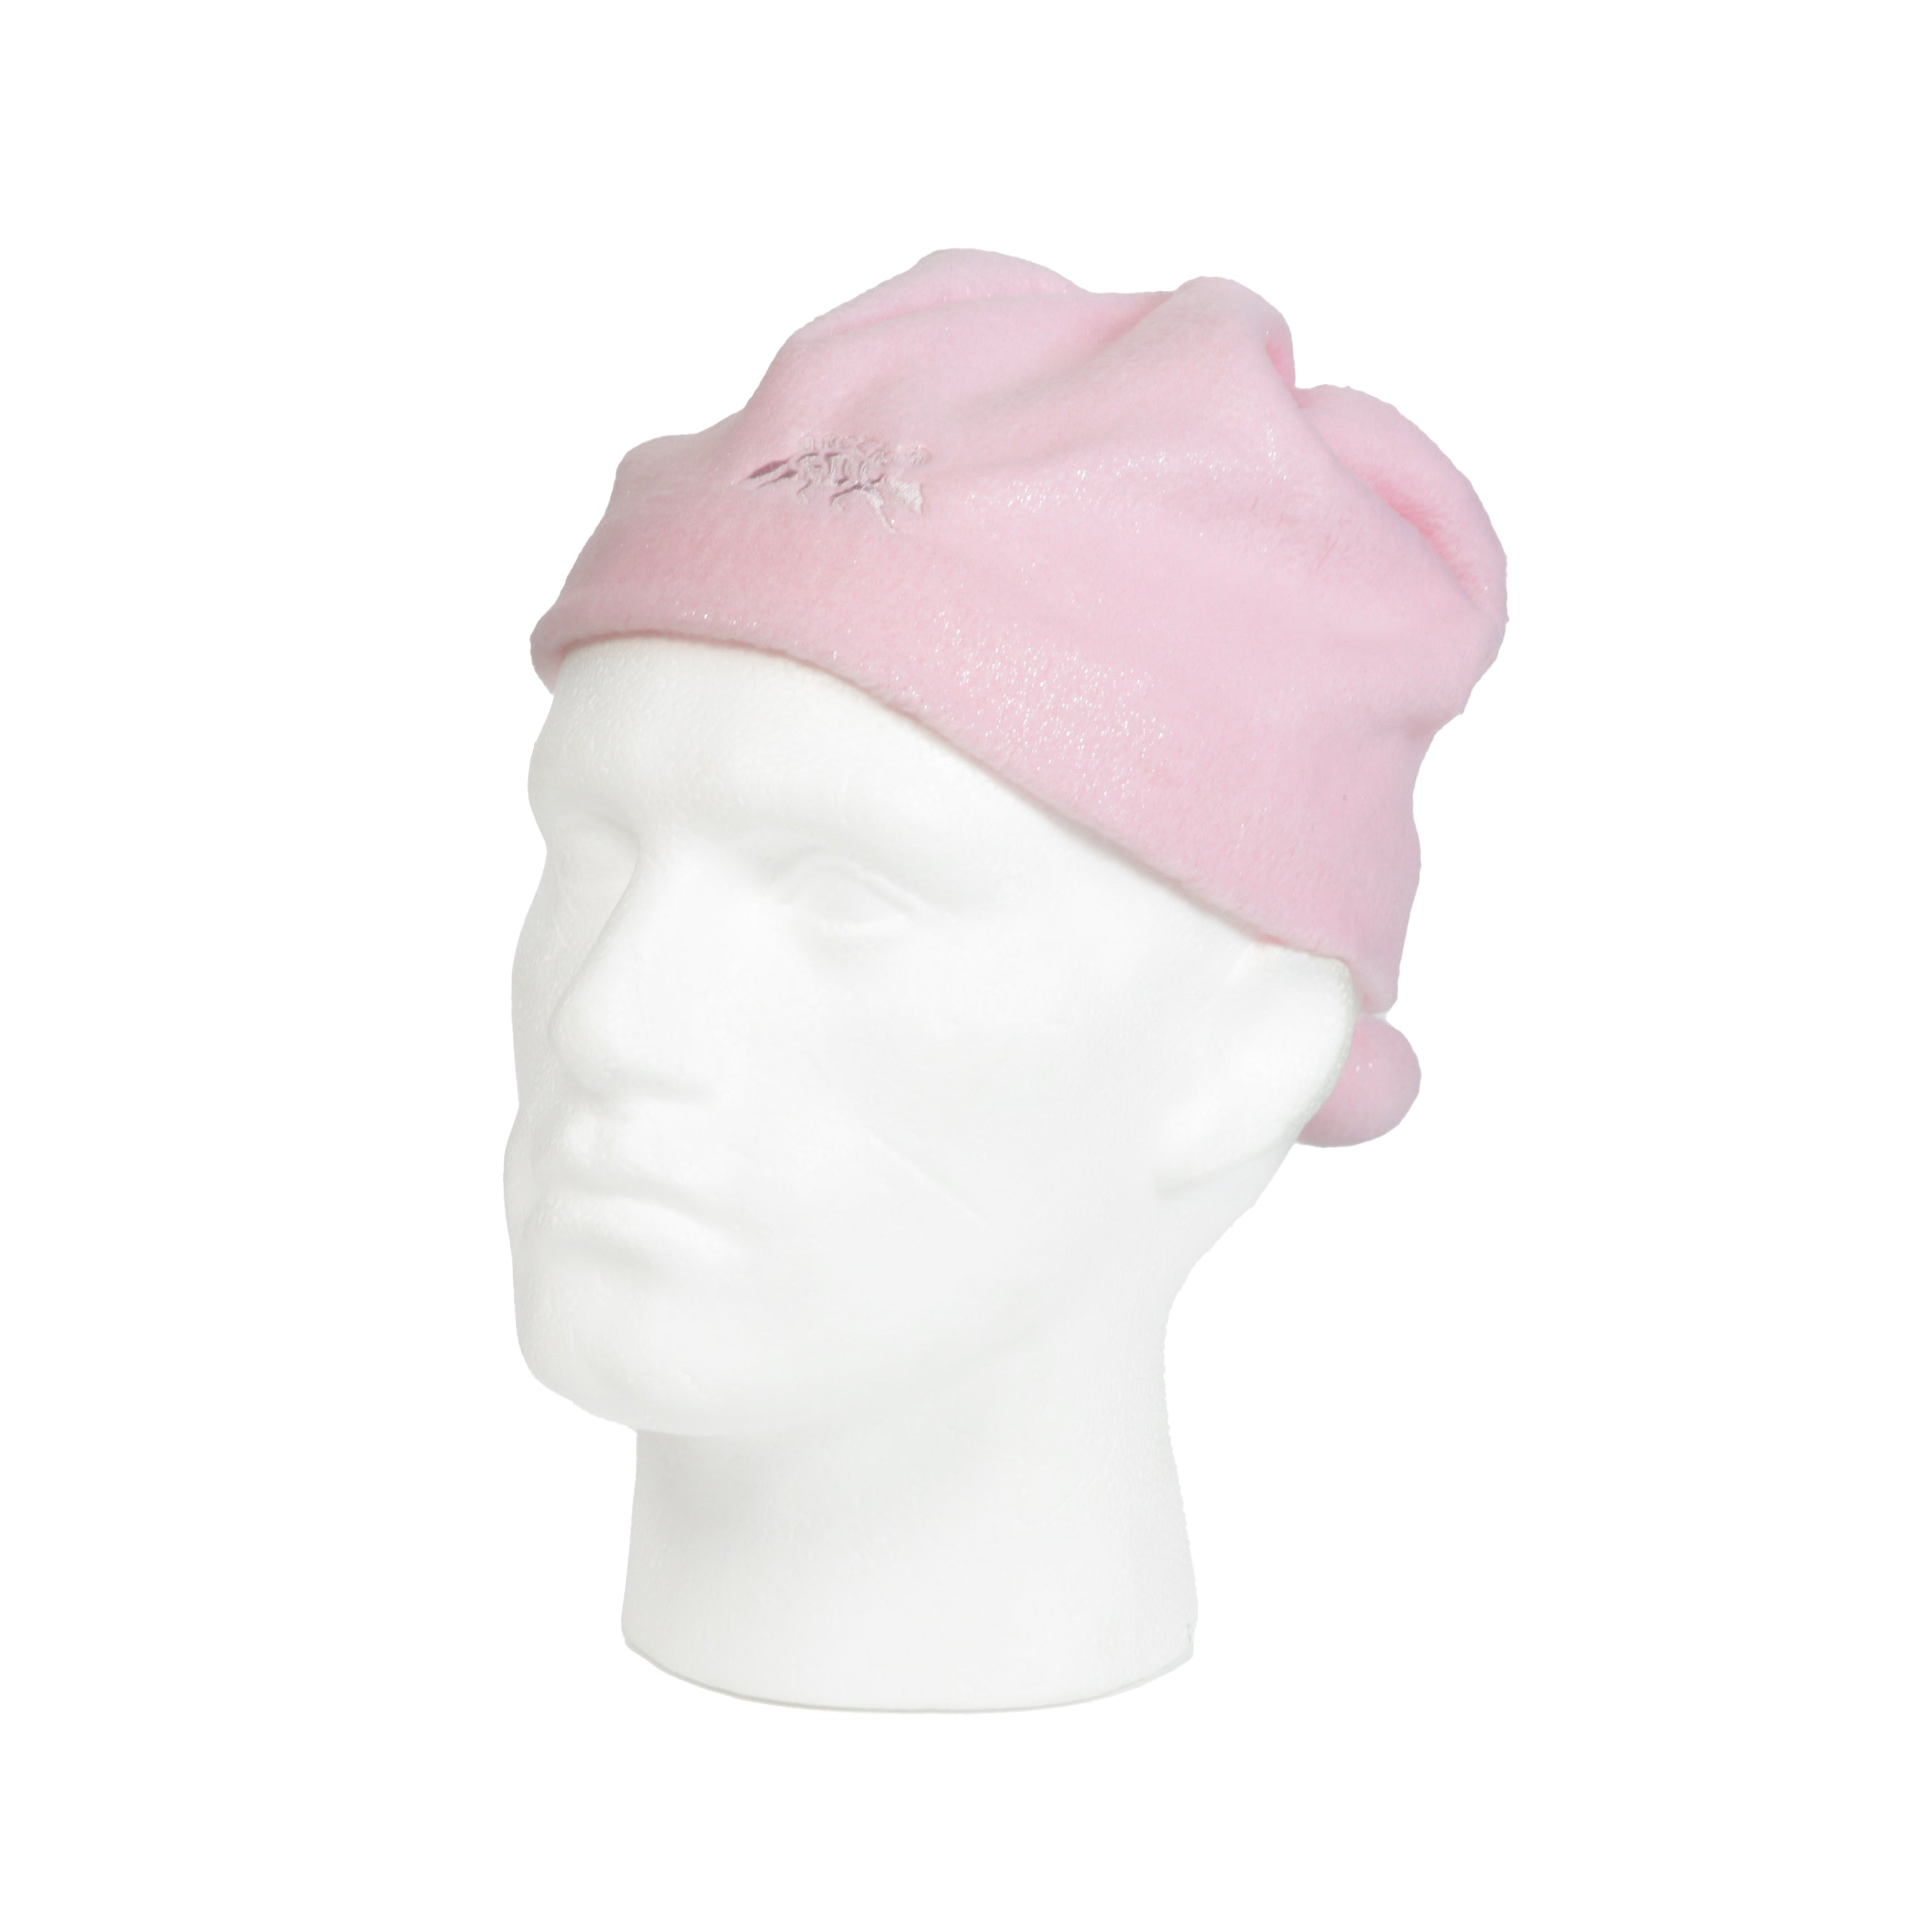 Arctic Fox Fleece Beanie Hat with Bobbles - Sparkly Pink